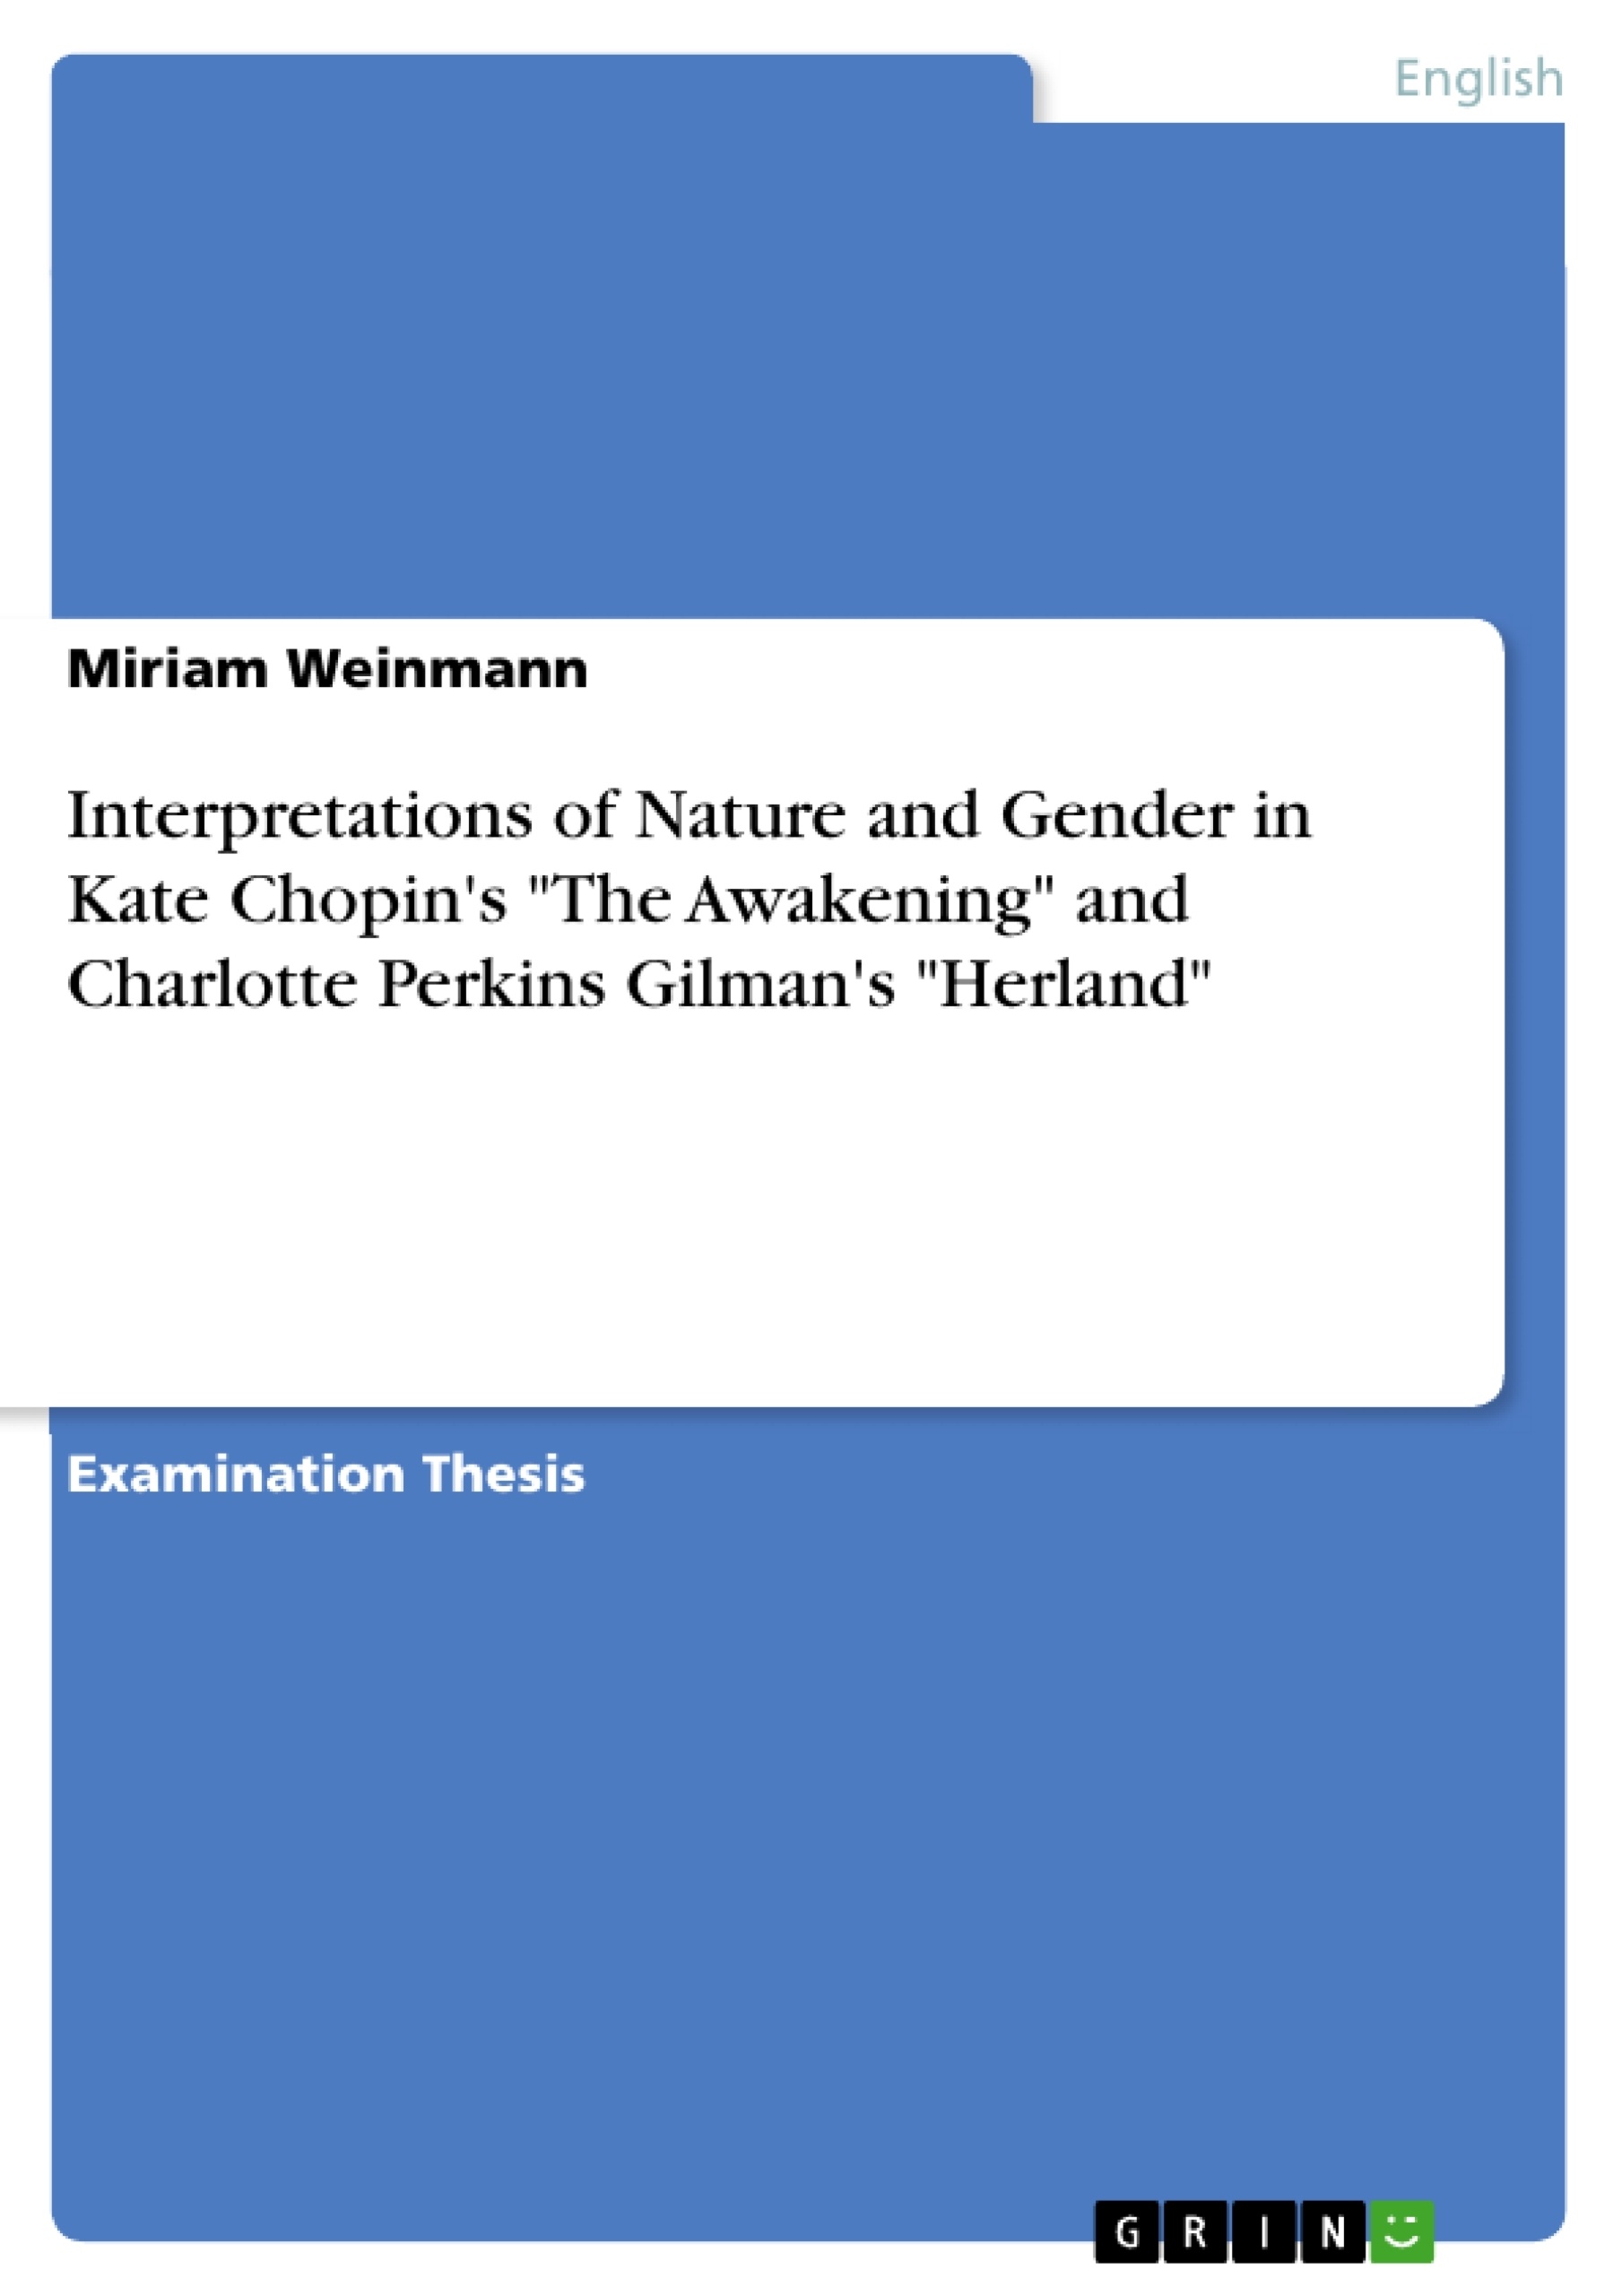 Título: Interpretations of Nature and Gender in Kate Chopin's "The Awakening" and Charlotte Perkins Gilman's "Herland"